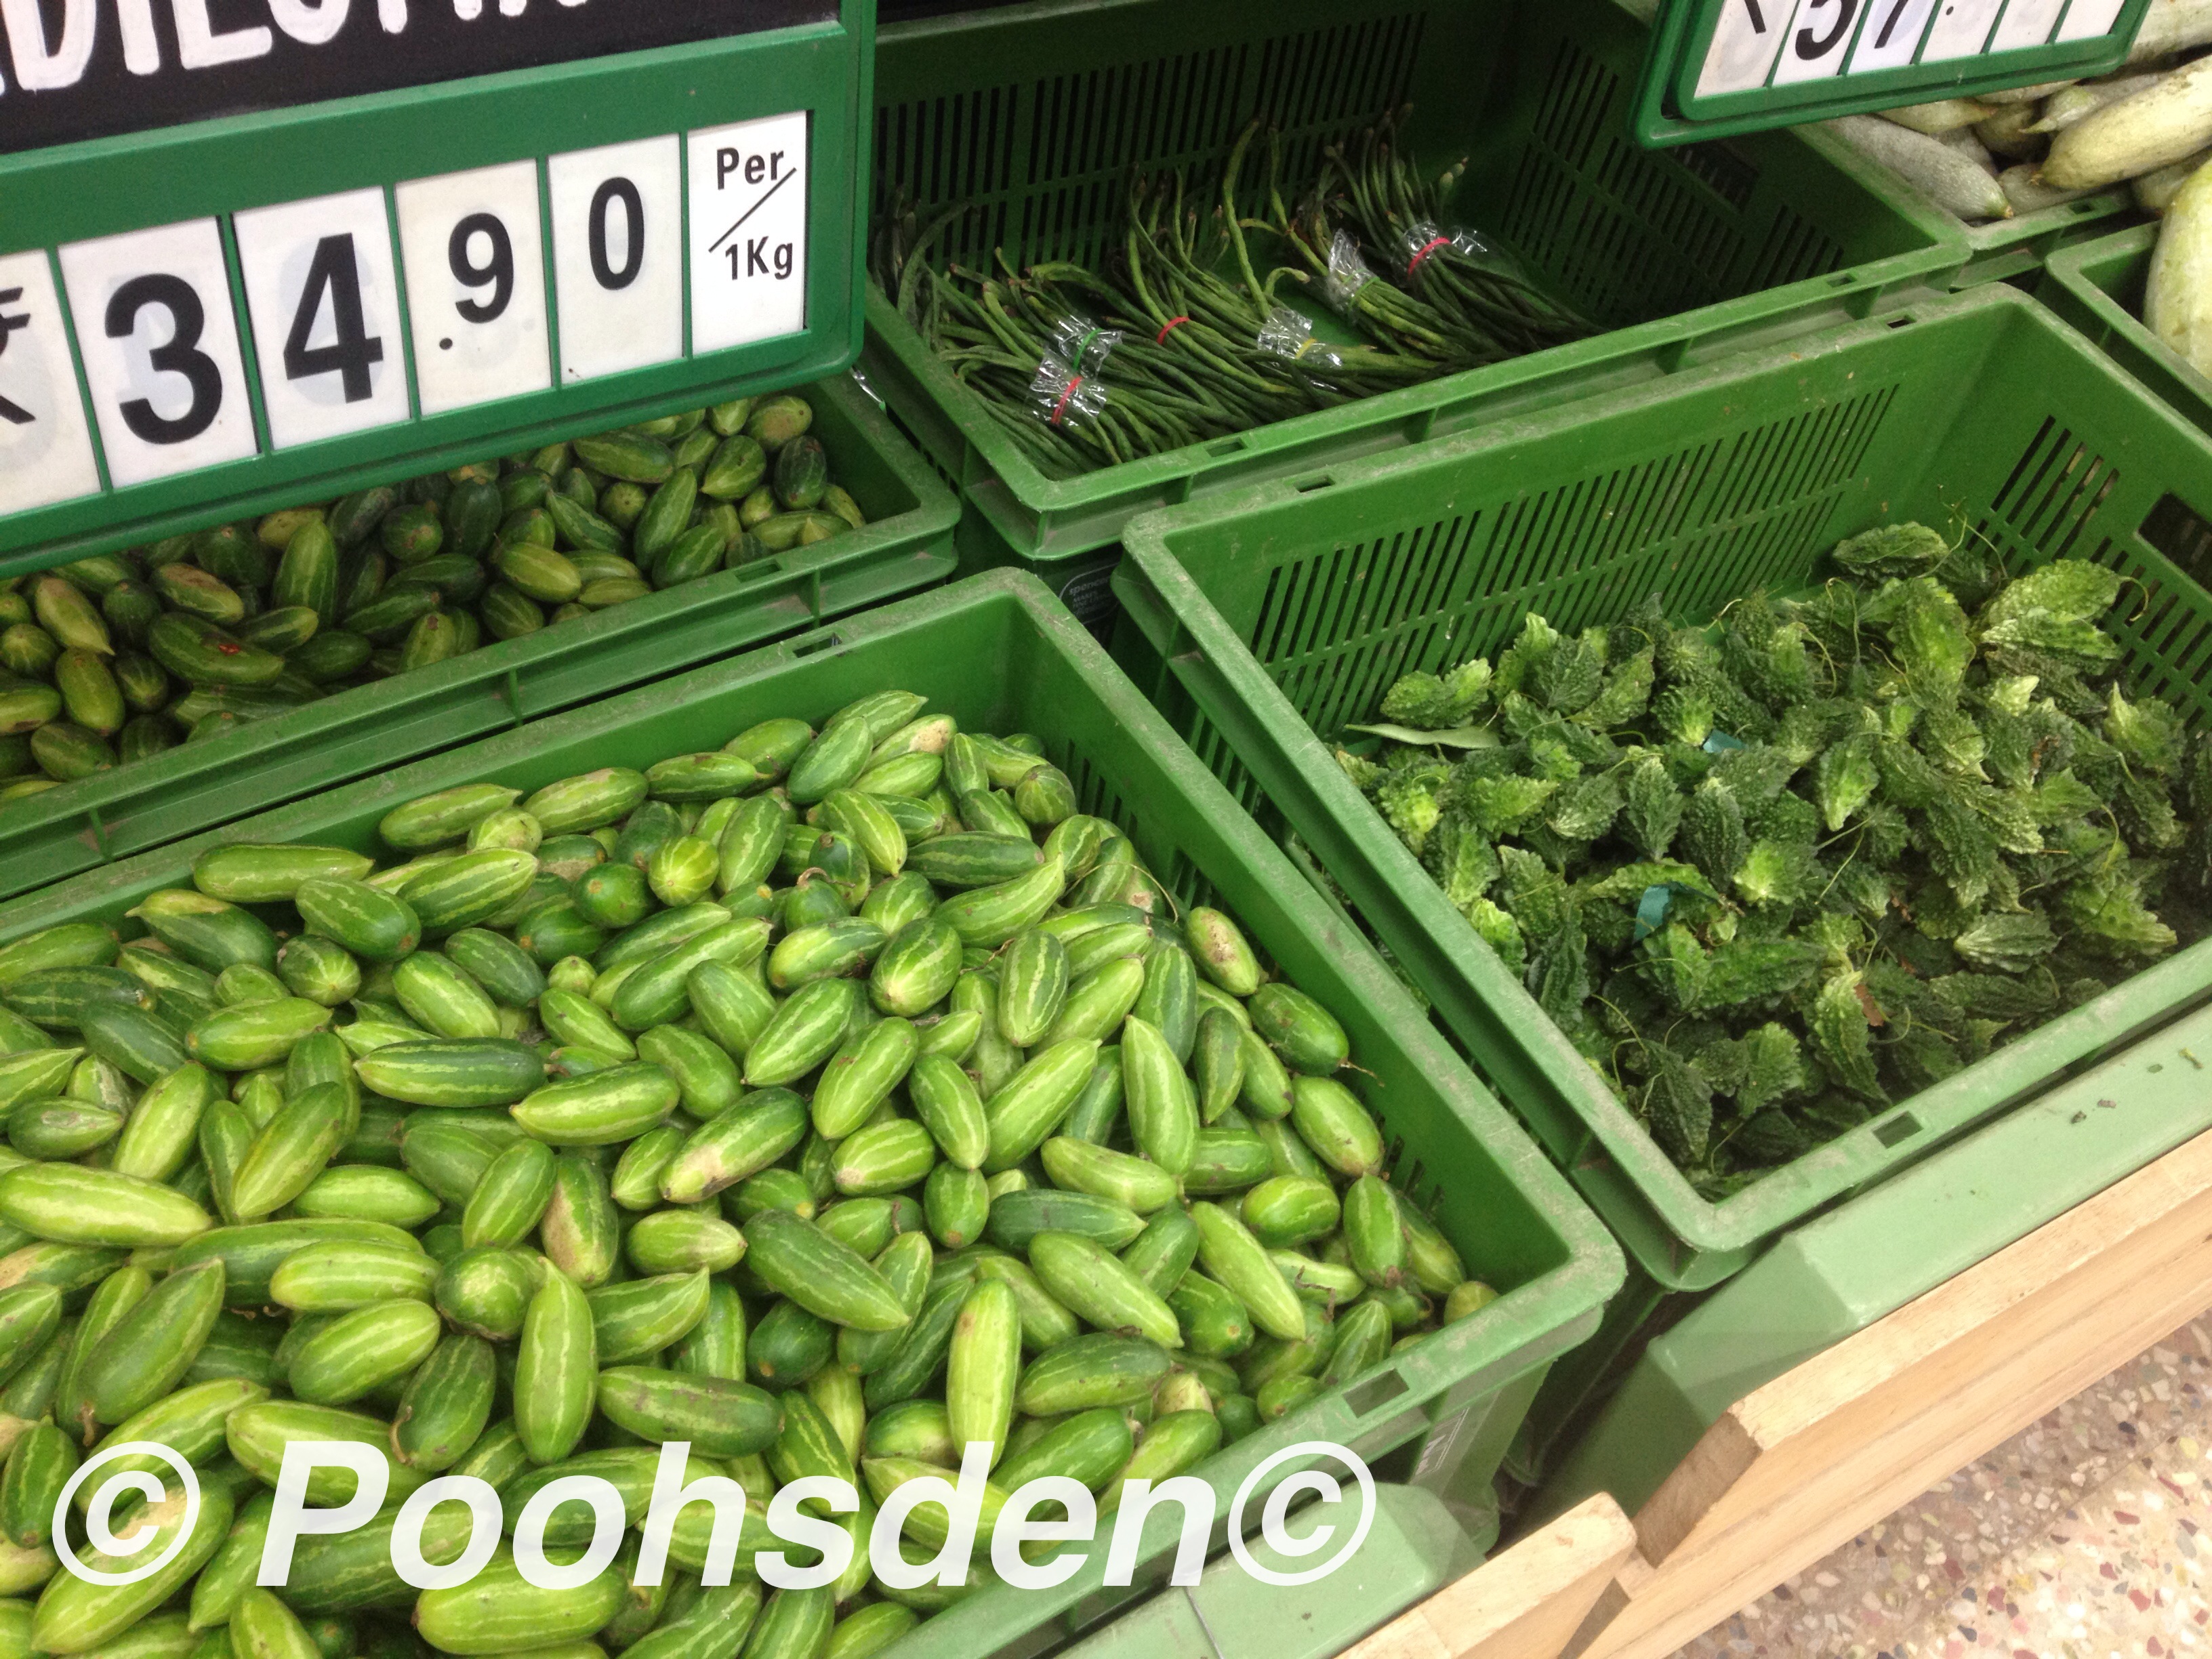 Kinds of green - vegetables for sale at a supermarket in Chennai